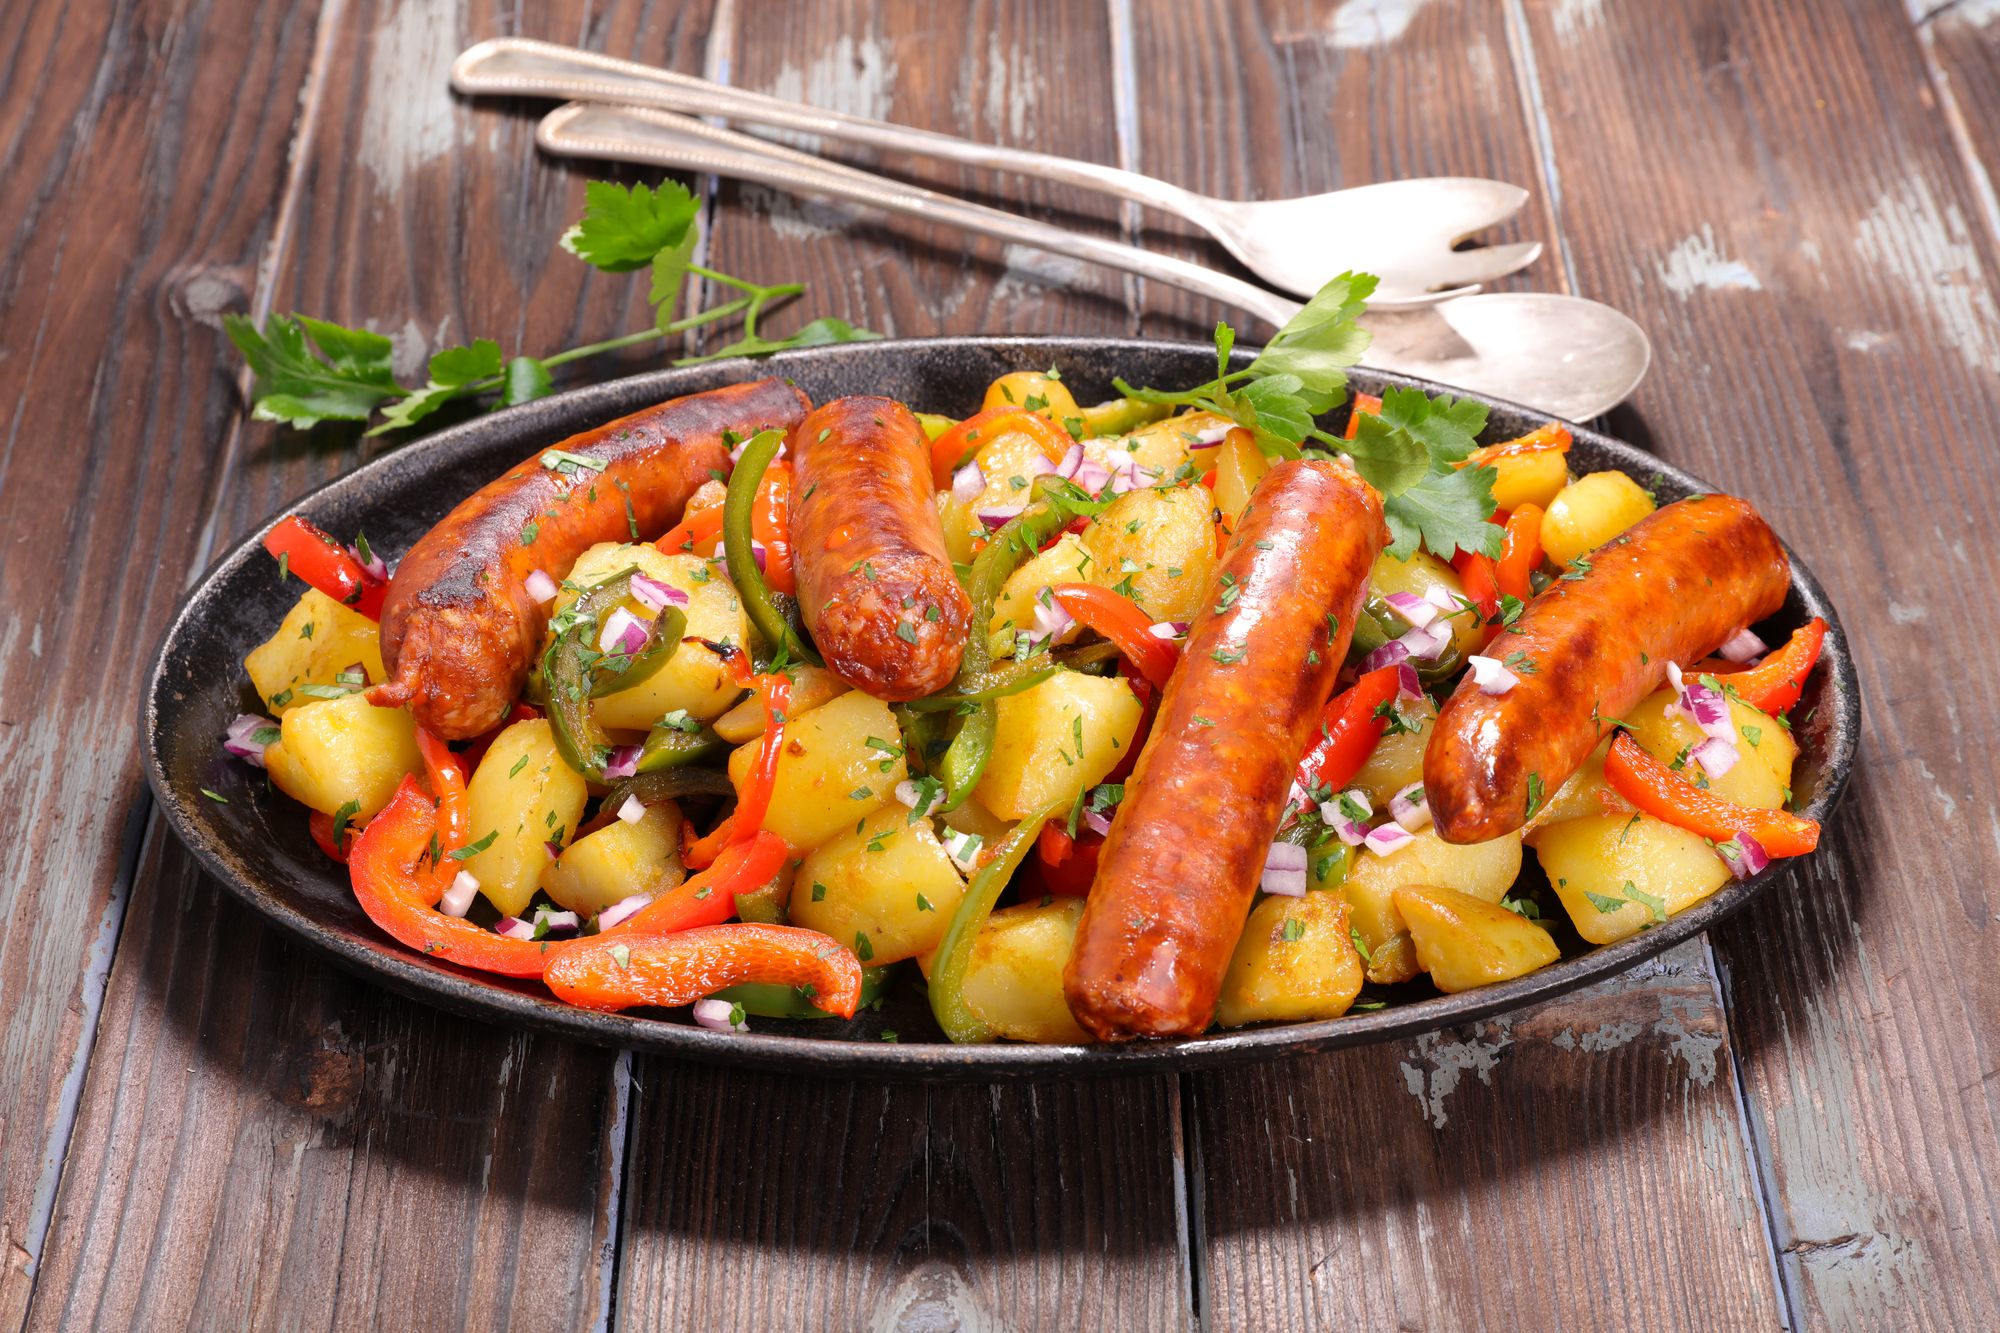 Sausages and Capsicum Bake with Balsamic Vinegar